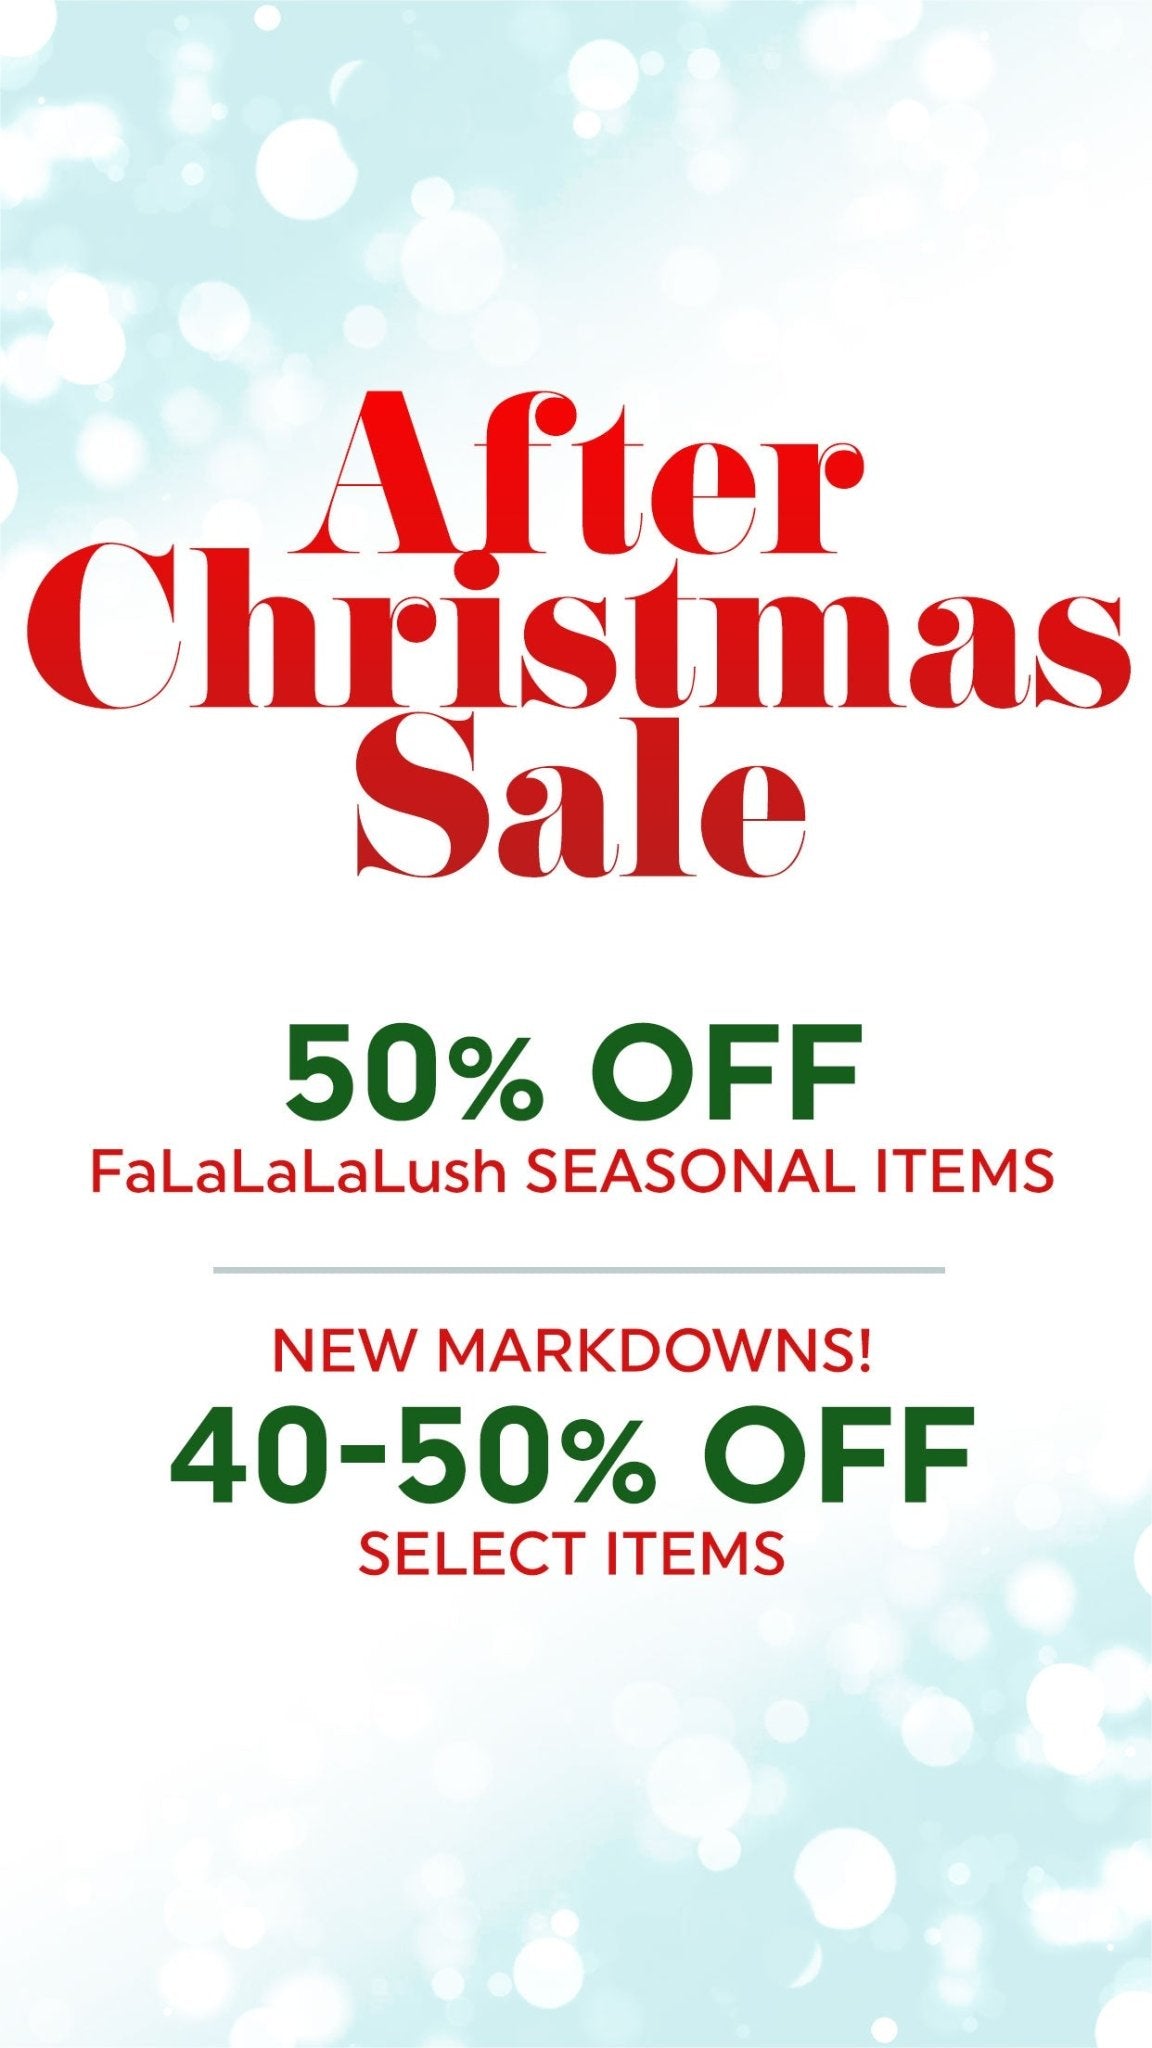 After Christmas sale at Lush Fashion Lounge boutique in Oklahoma. Seasonal items 50% off and more! 